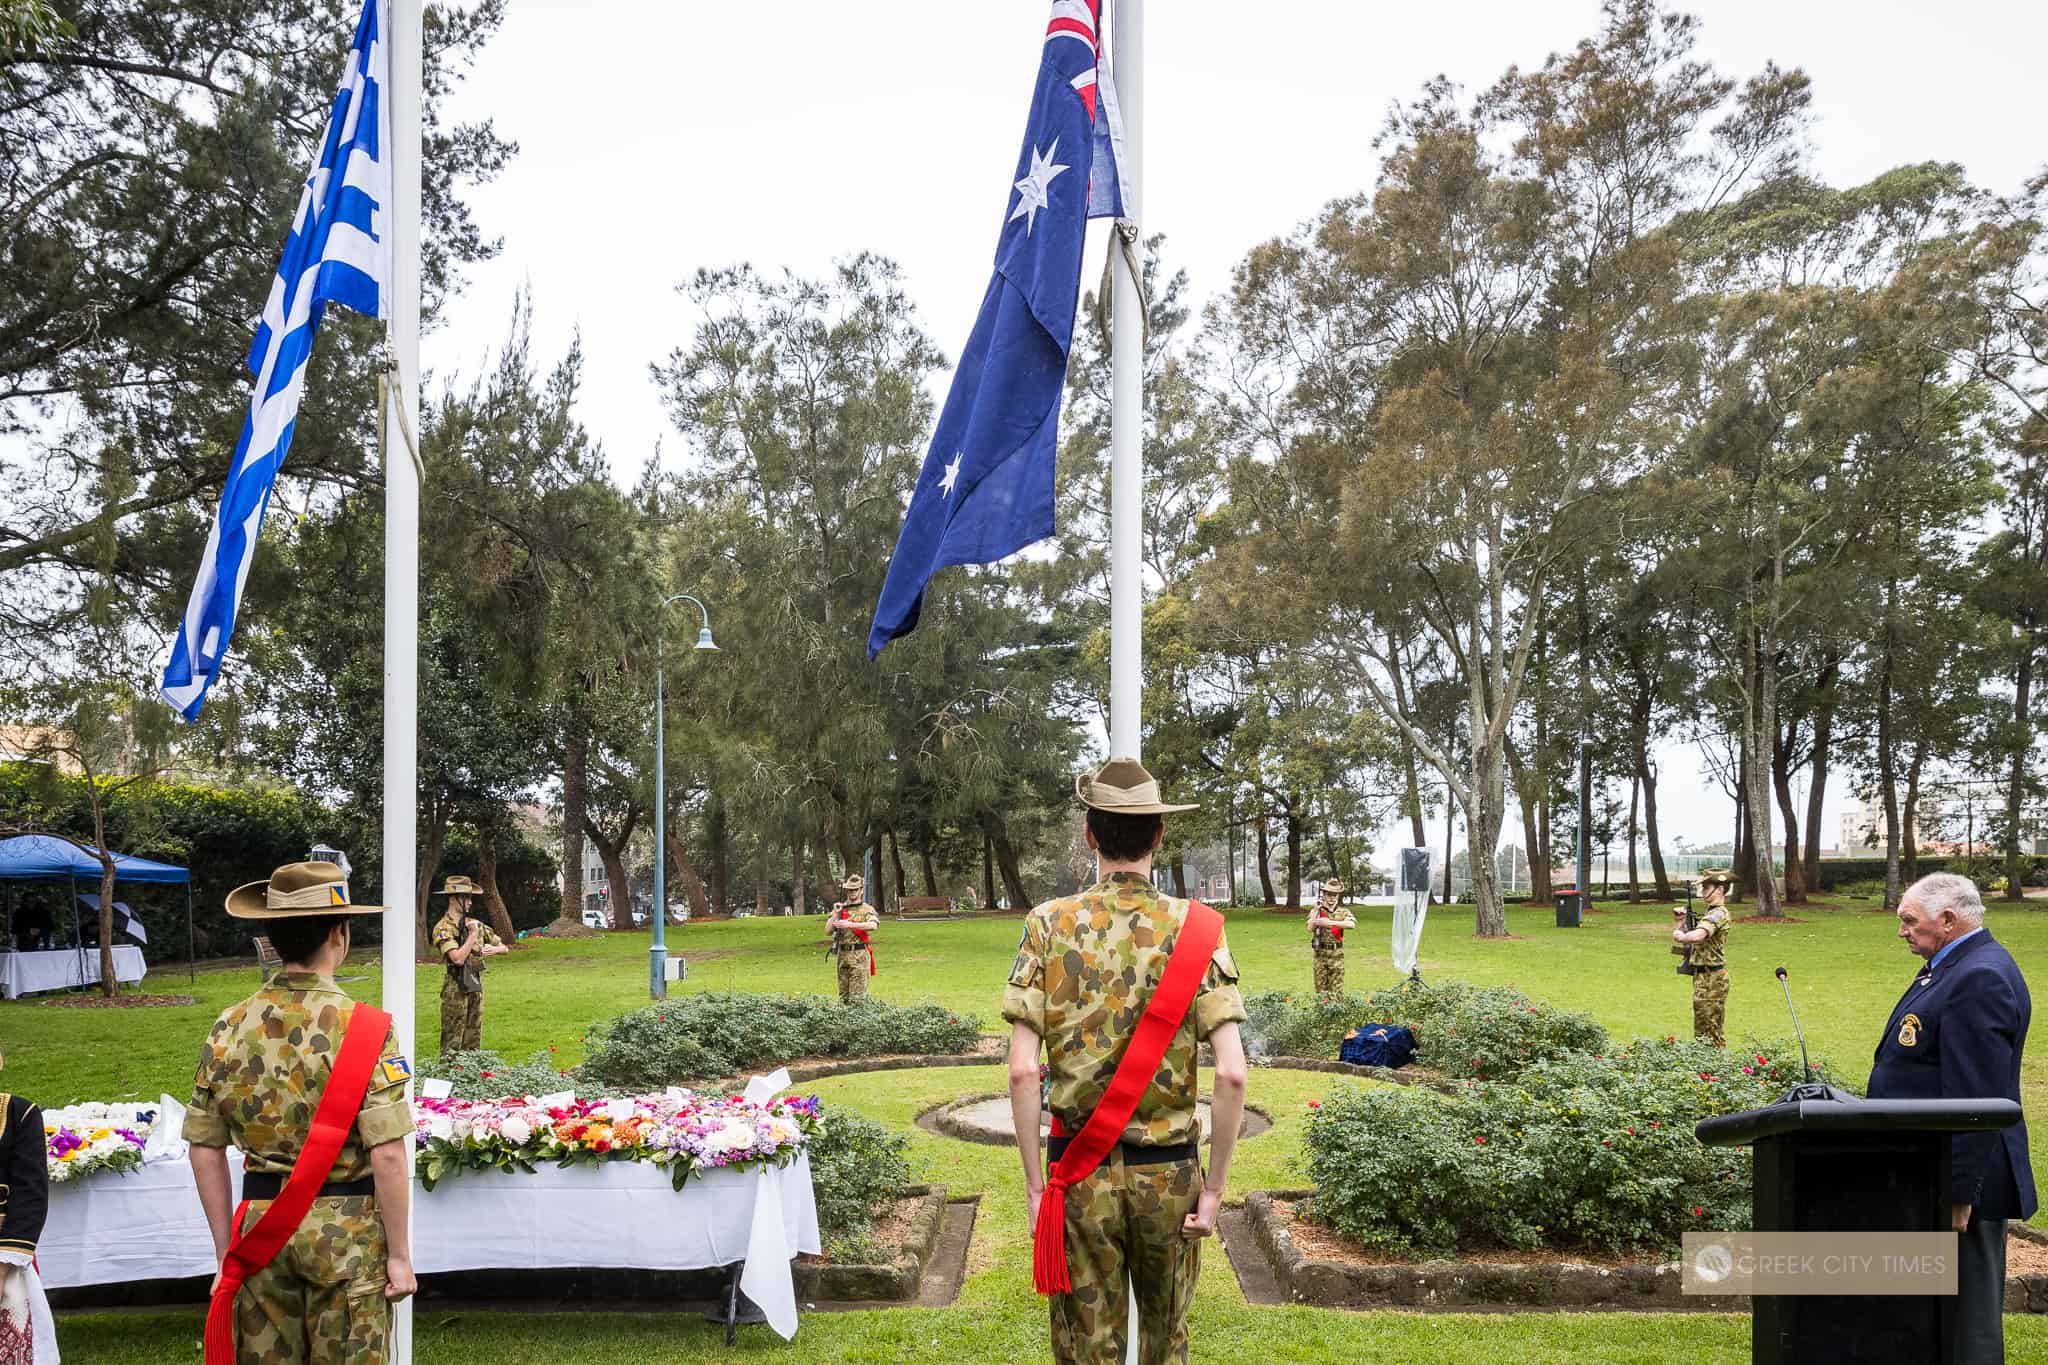 Memorial in Waverley, Sydney, honours the 80th anniversary of the Battle of Crete